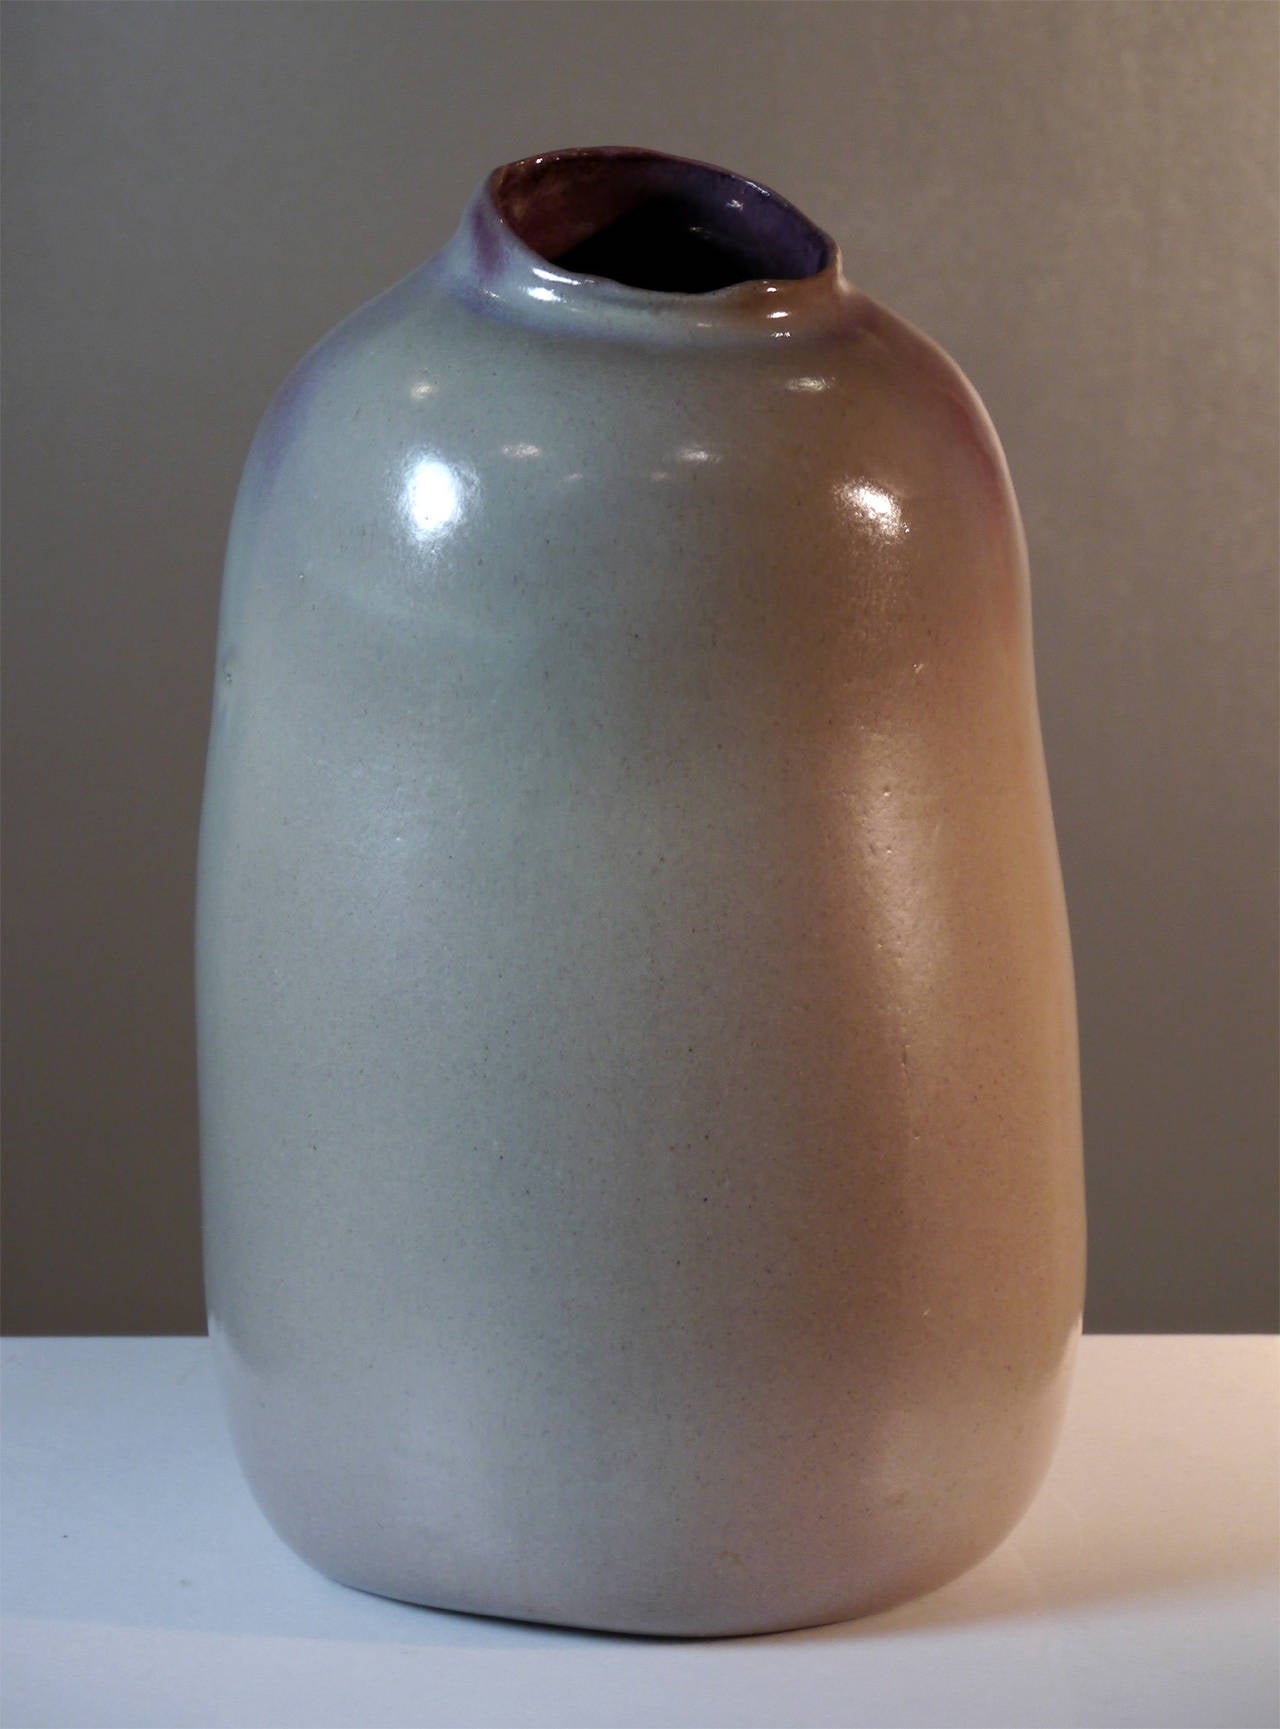 Unique and massive vase, dated 1982.

Manganese black earth with a gradation from satinated to glossy glazes.

Known for his involvement in French artists defense and active member of the "Atelier des Métiers d'Art" exhibitions with